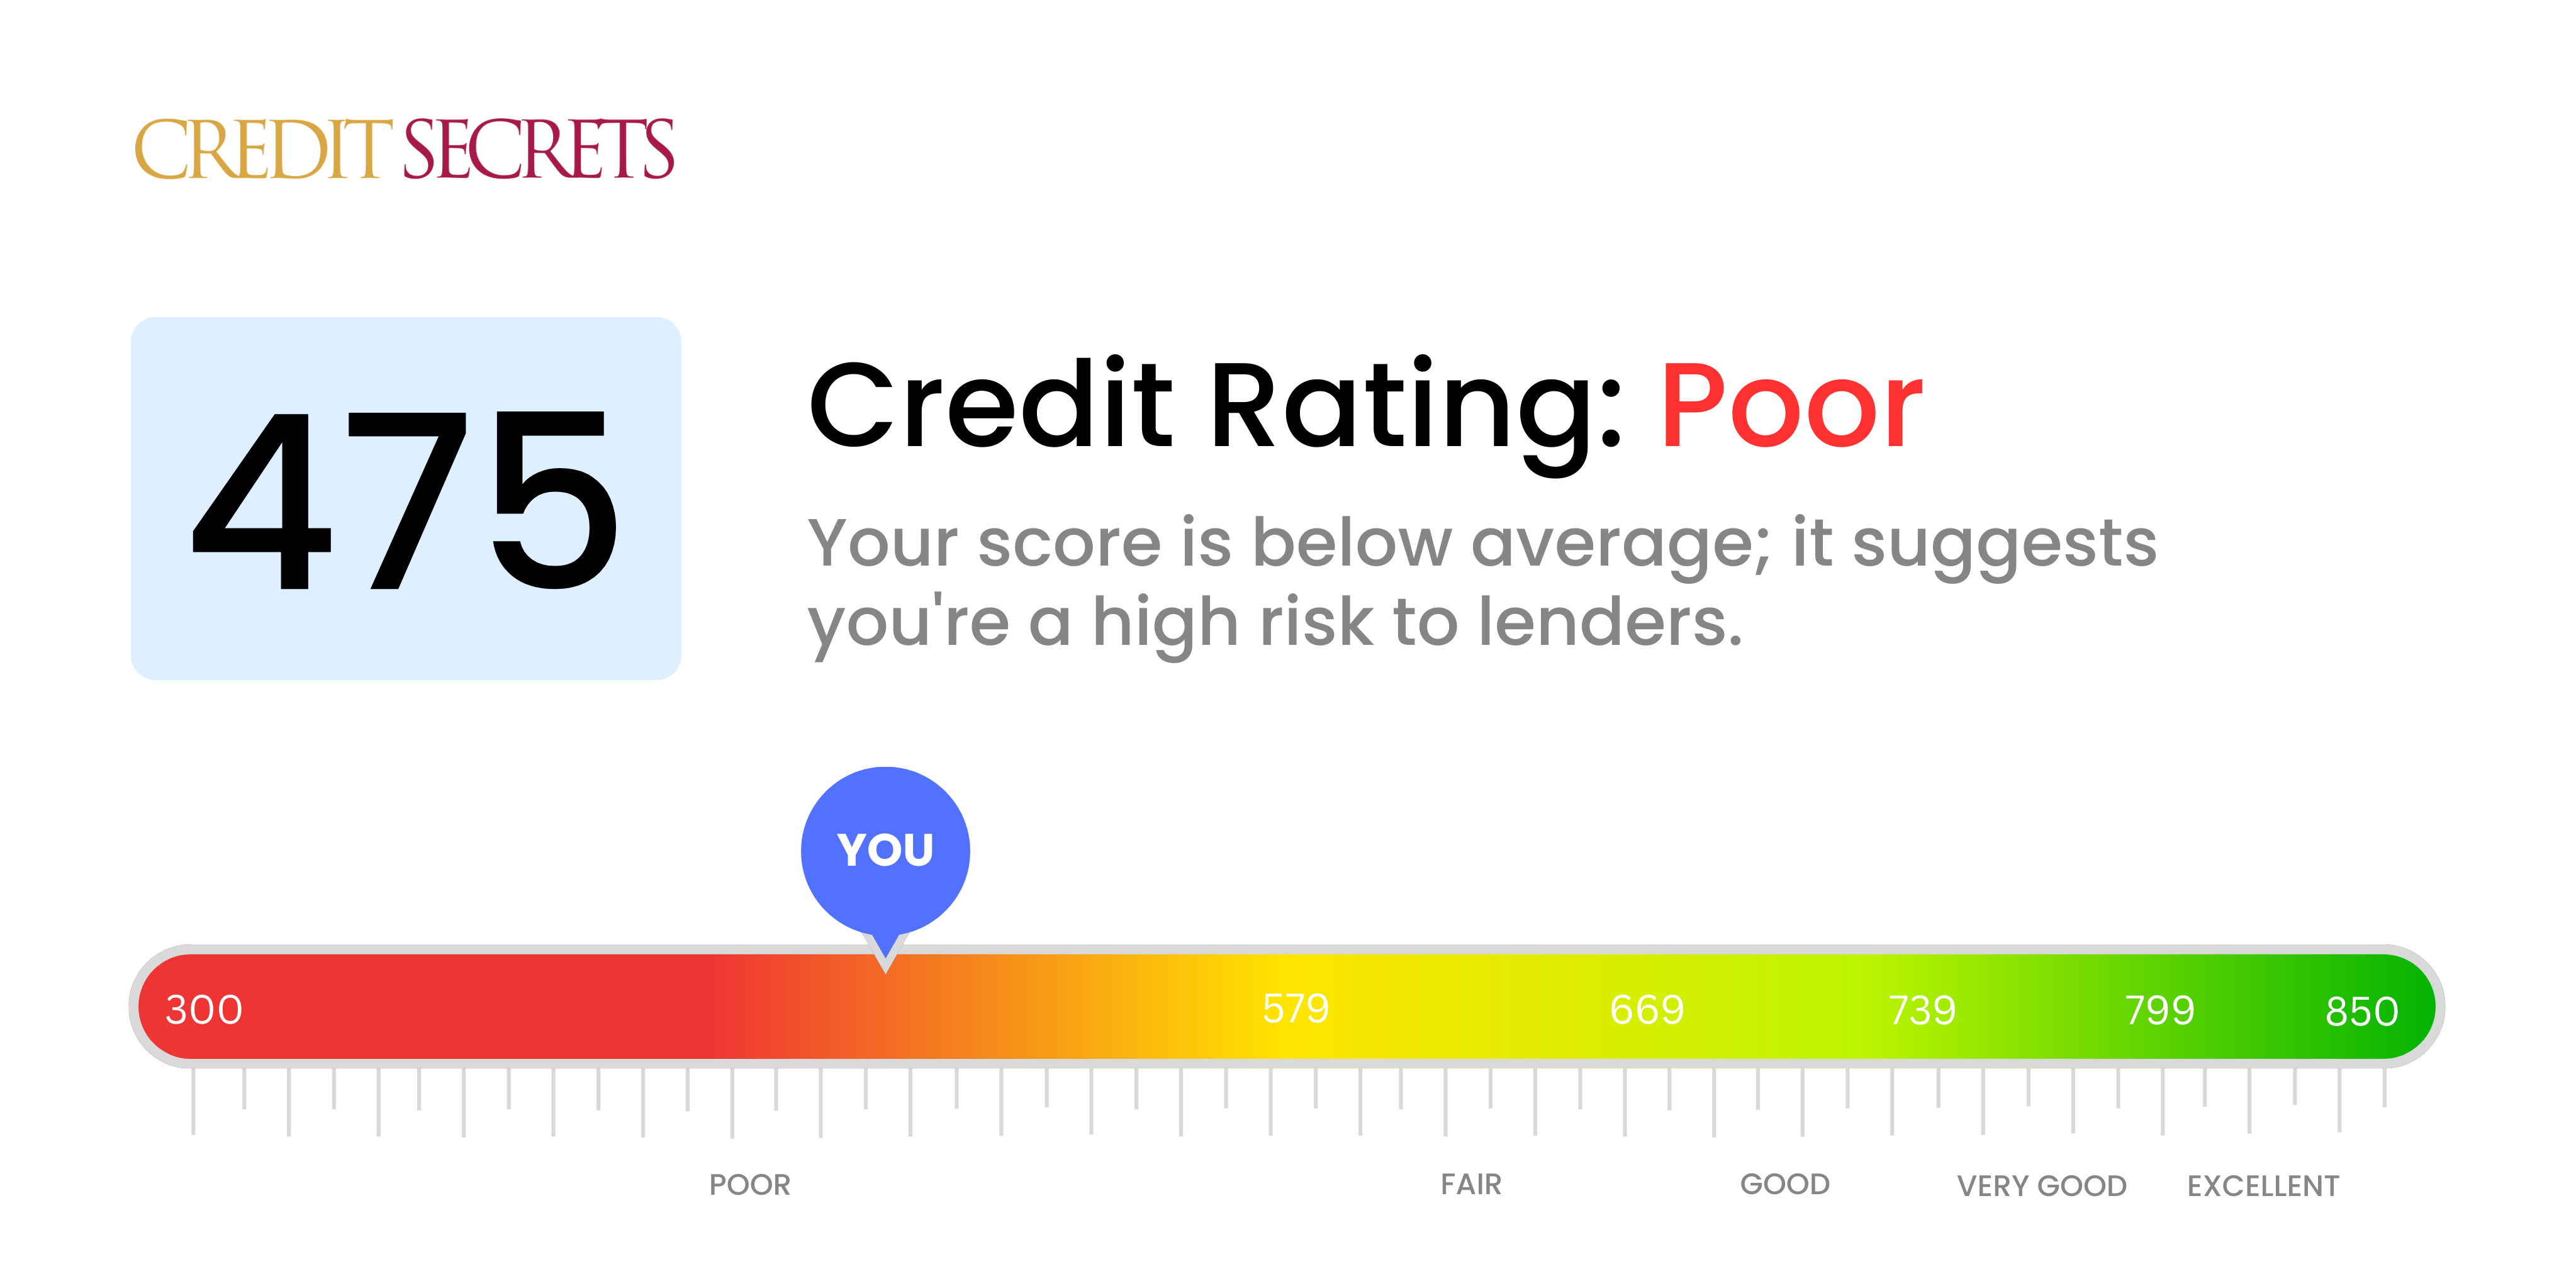 Is 475 a good credit score?